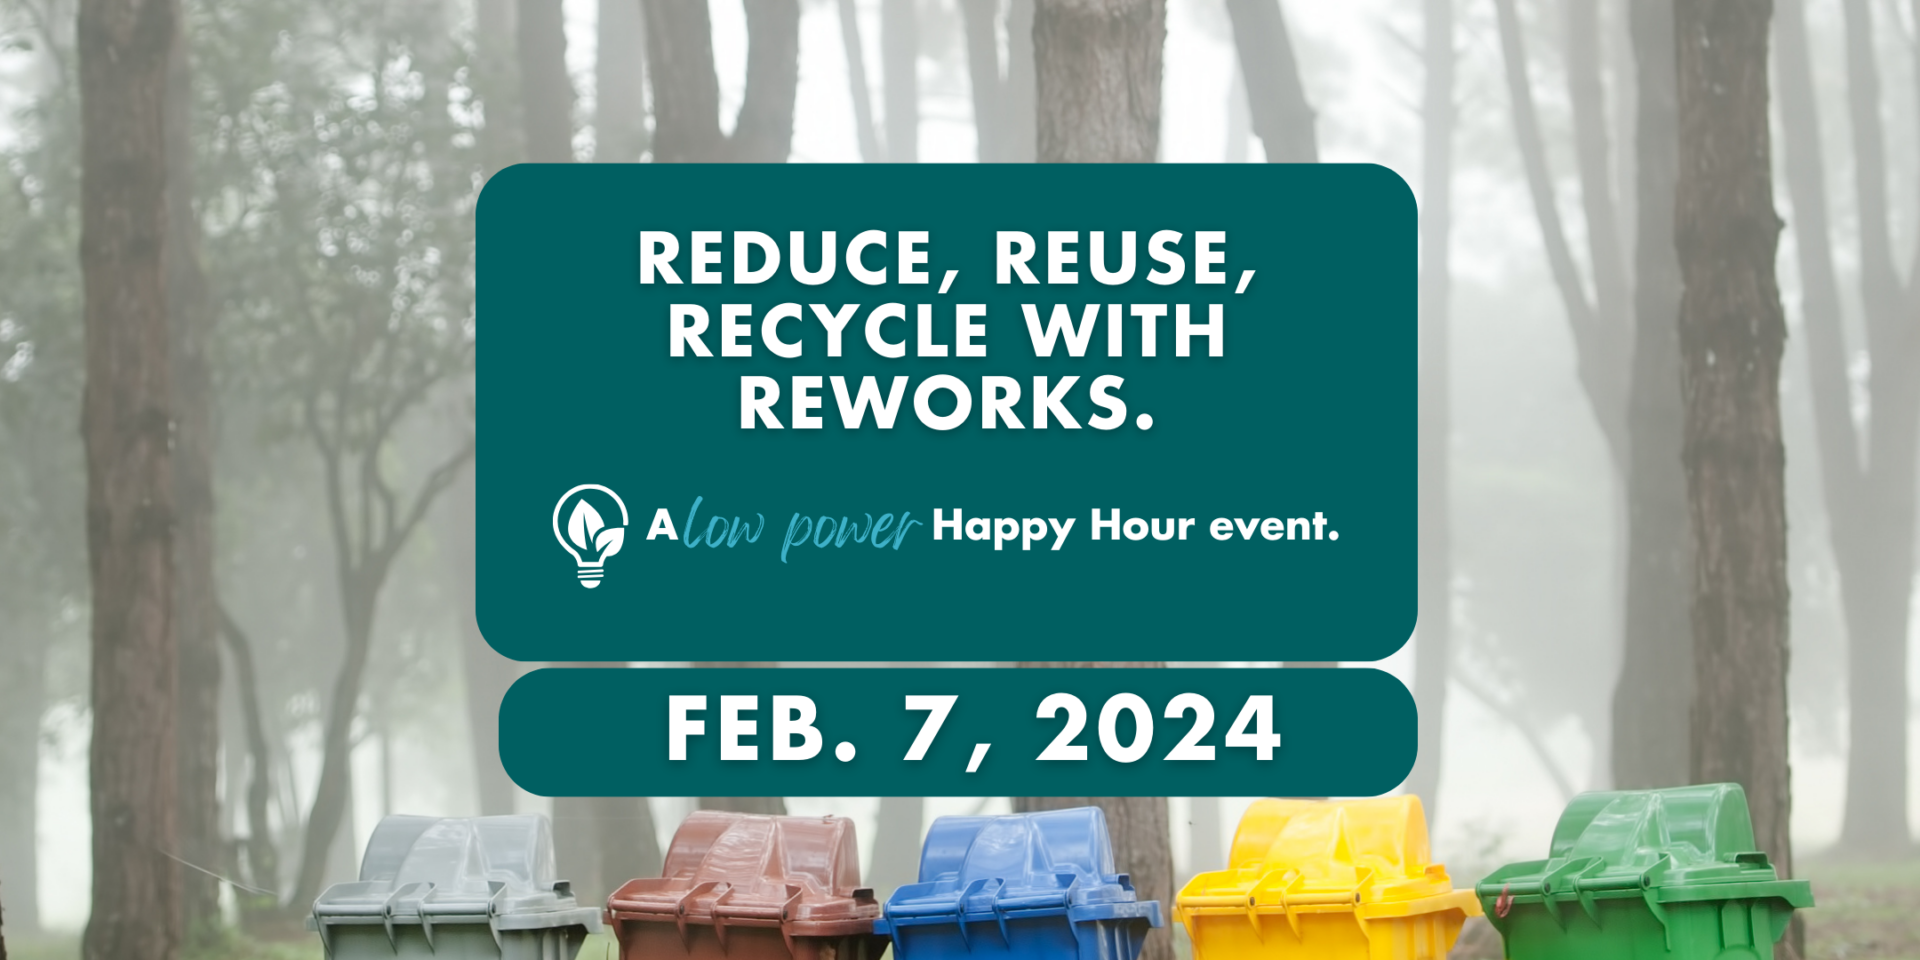 Event details and in background trees with colored containers for recycling